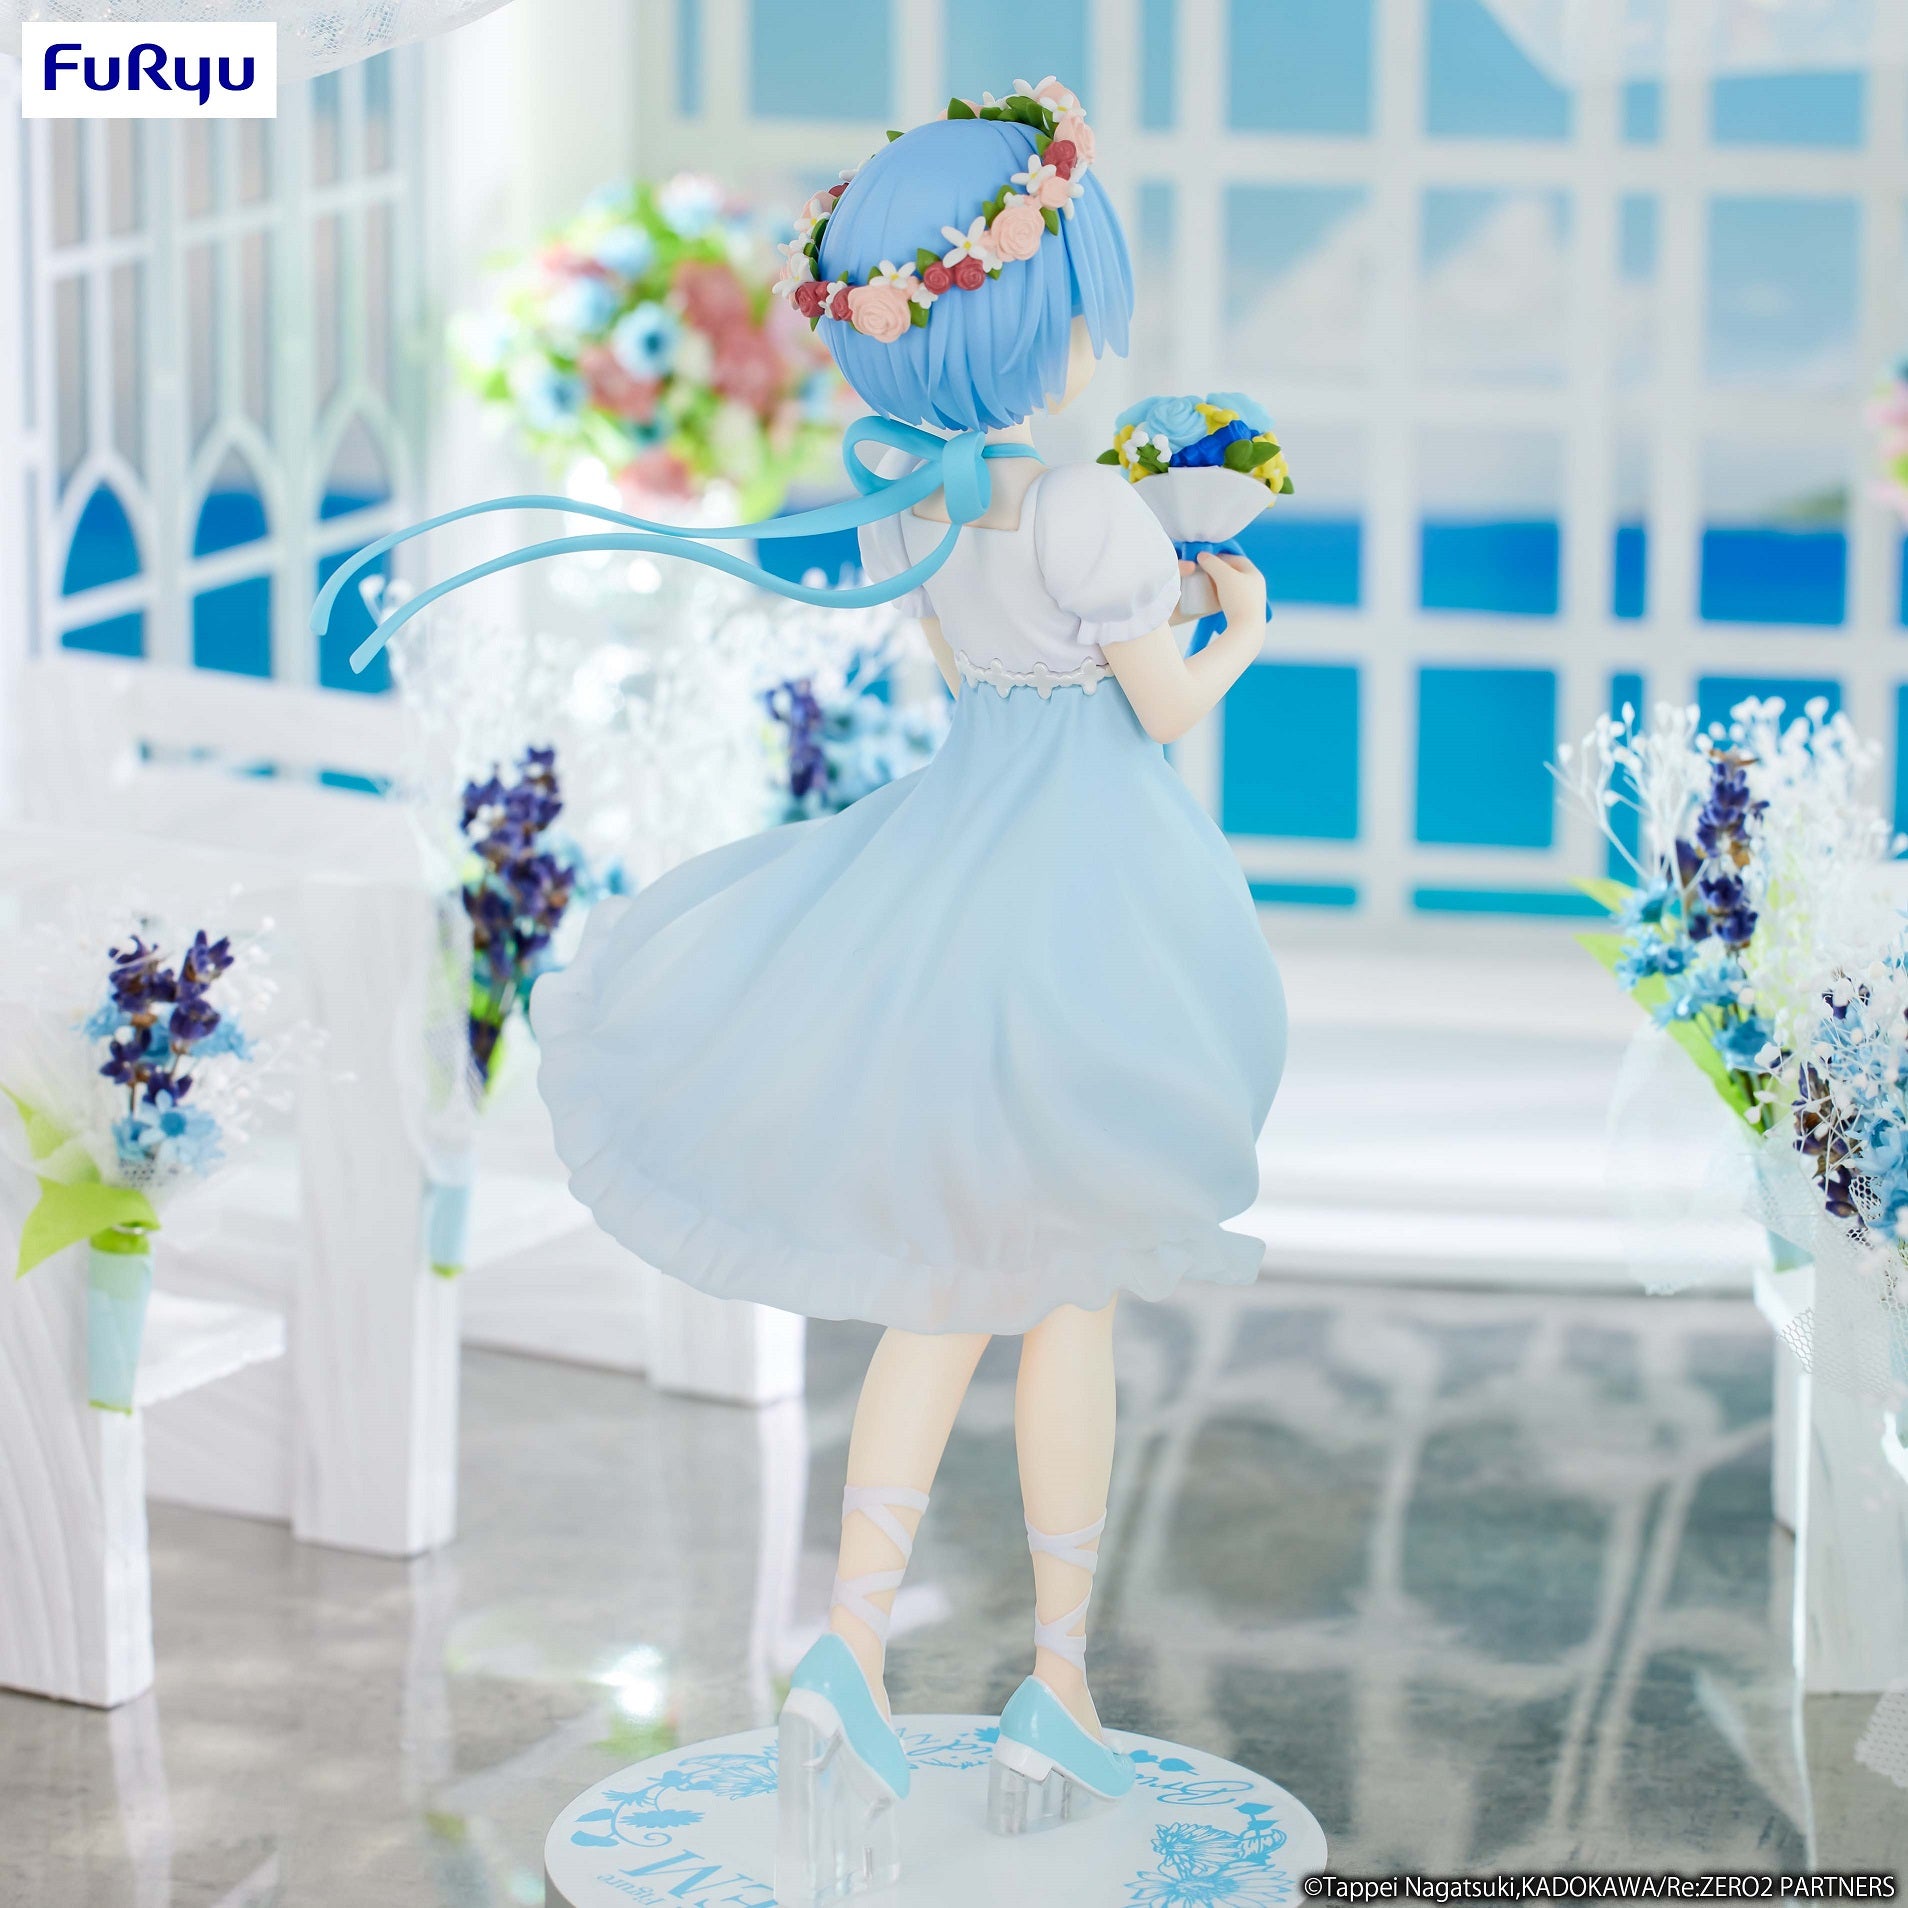 Furyu Figures Trio Try It: Re Zero Starting Life In Another World - Rem Bridesmaid